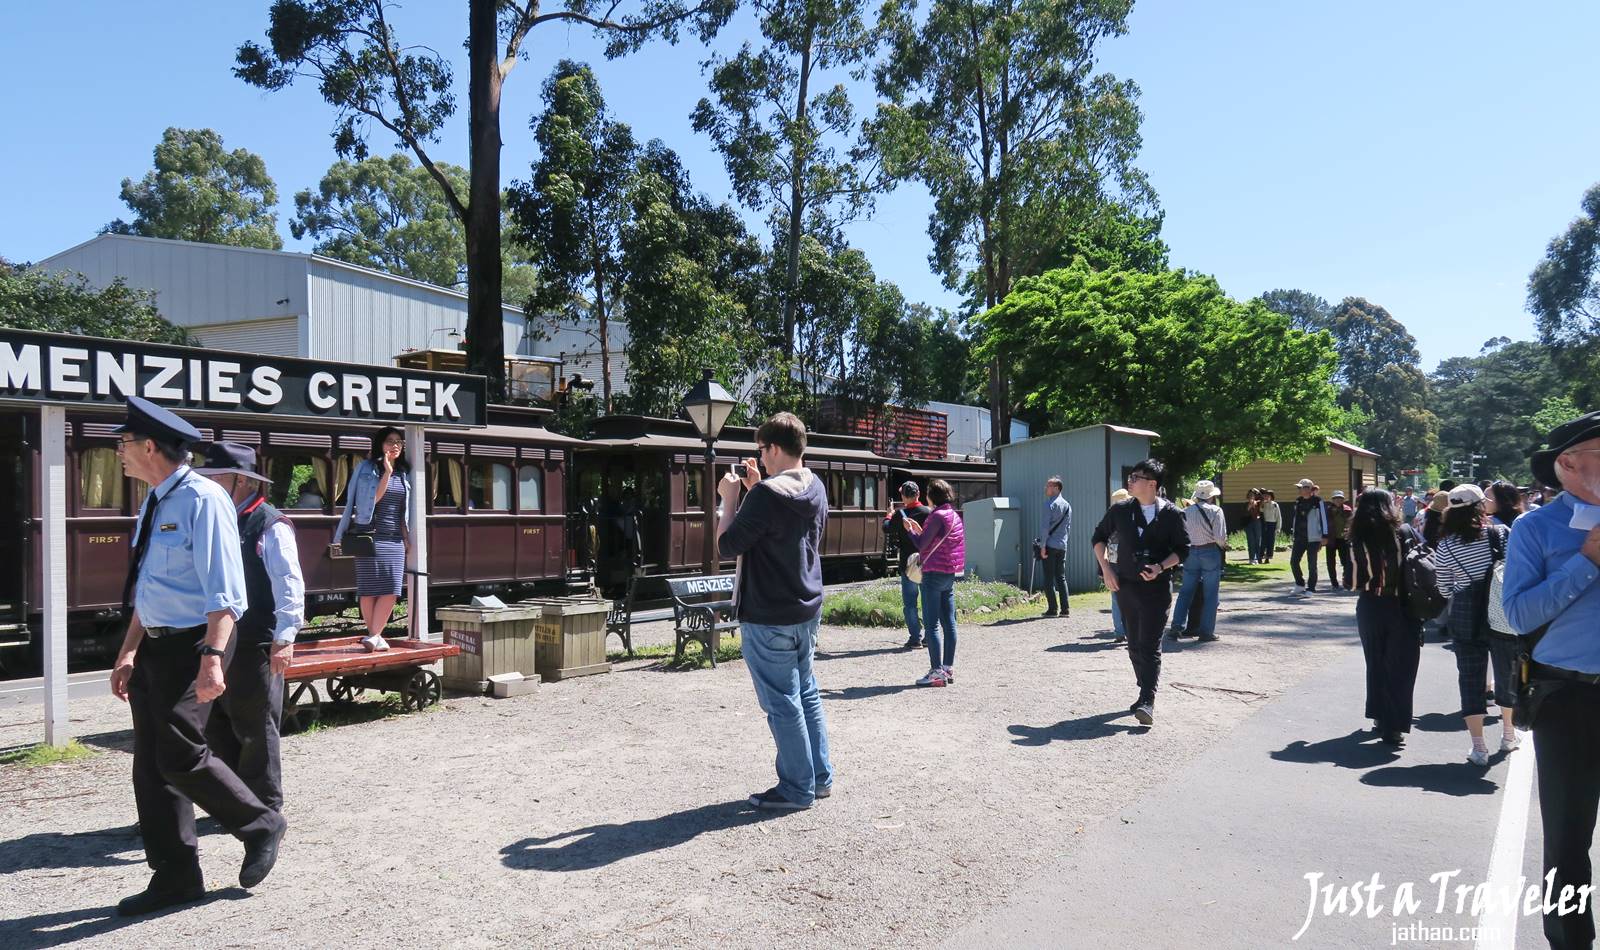 Melbourne-Puffing Billy Steam Train-Puffing Billy Railway-Fare-Boarding-Attractions-Recommendation-Independent Travel-Day Tour-Half Day Tour-Itinerary